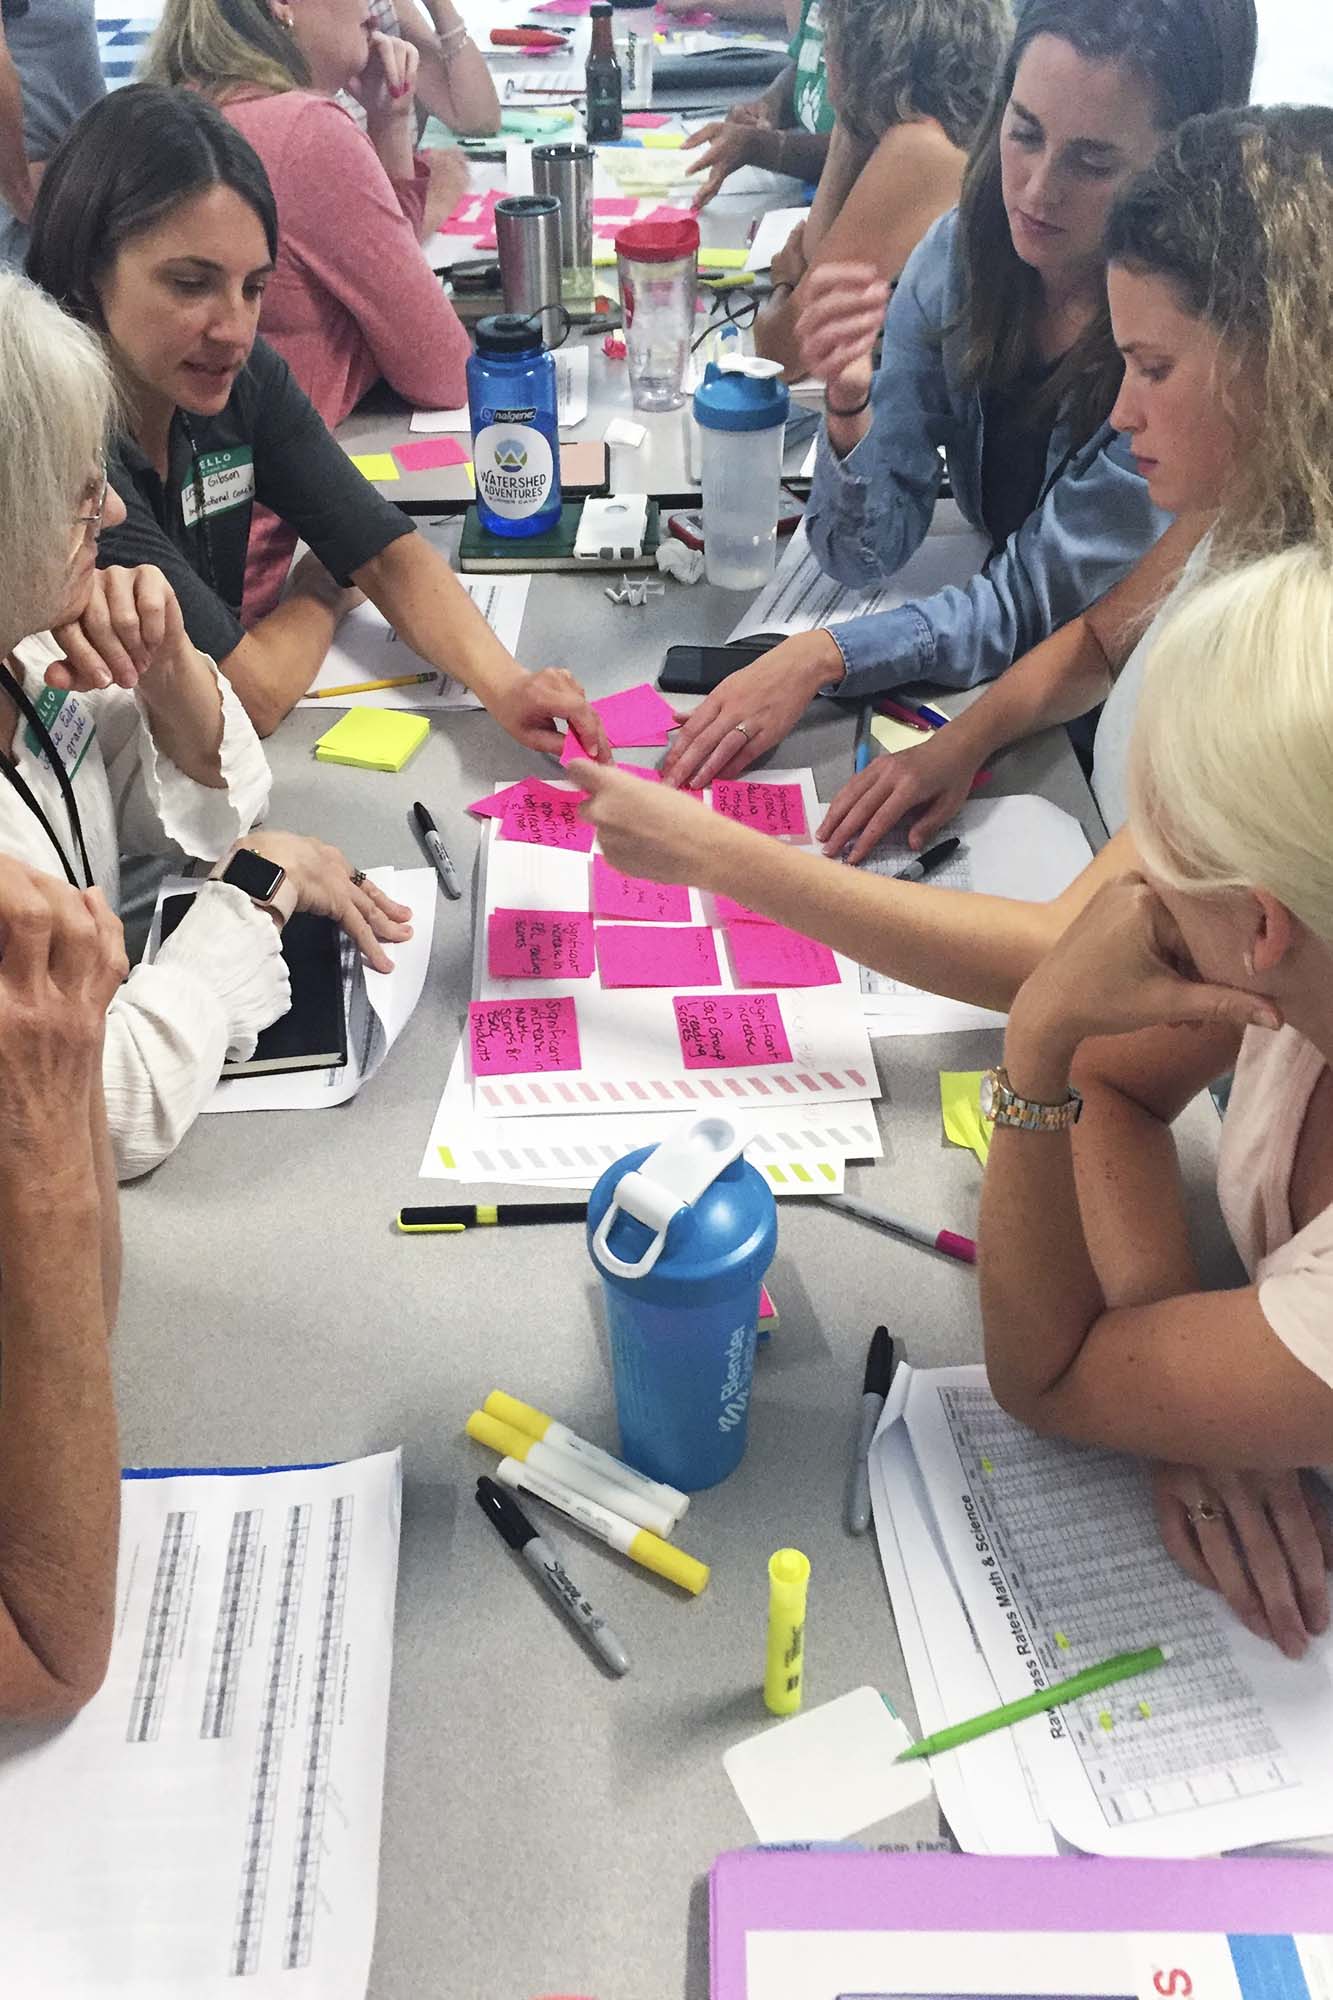 Group of people organizing pink sticky notes on a paper